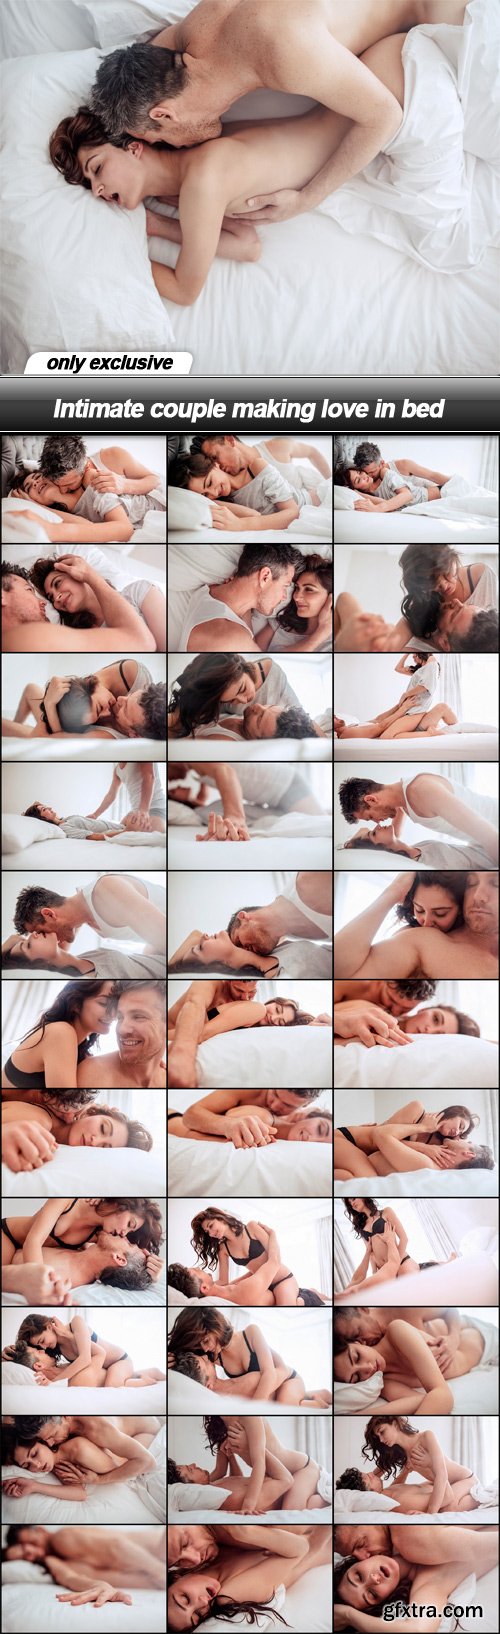 Intimate couple making love in bed - 34 UHQ JPEG